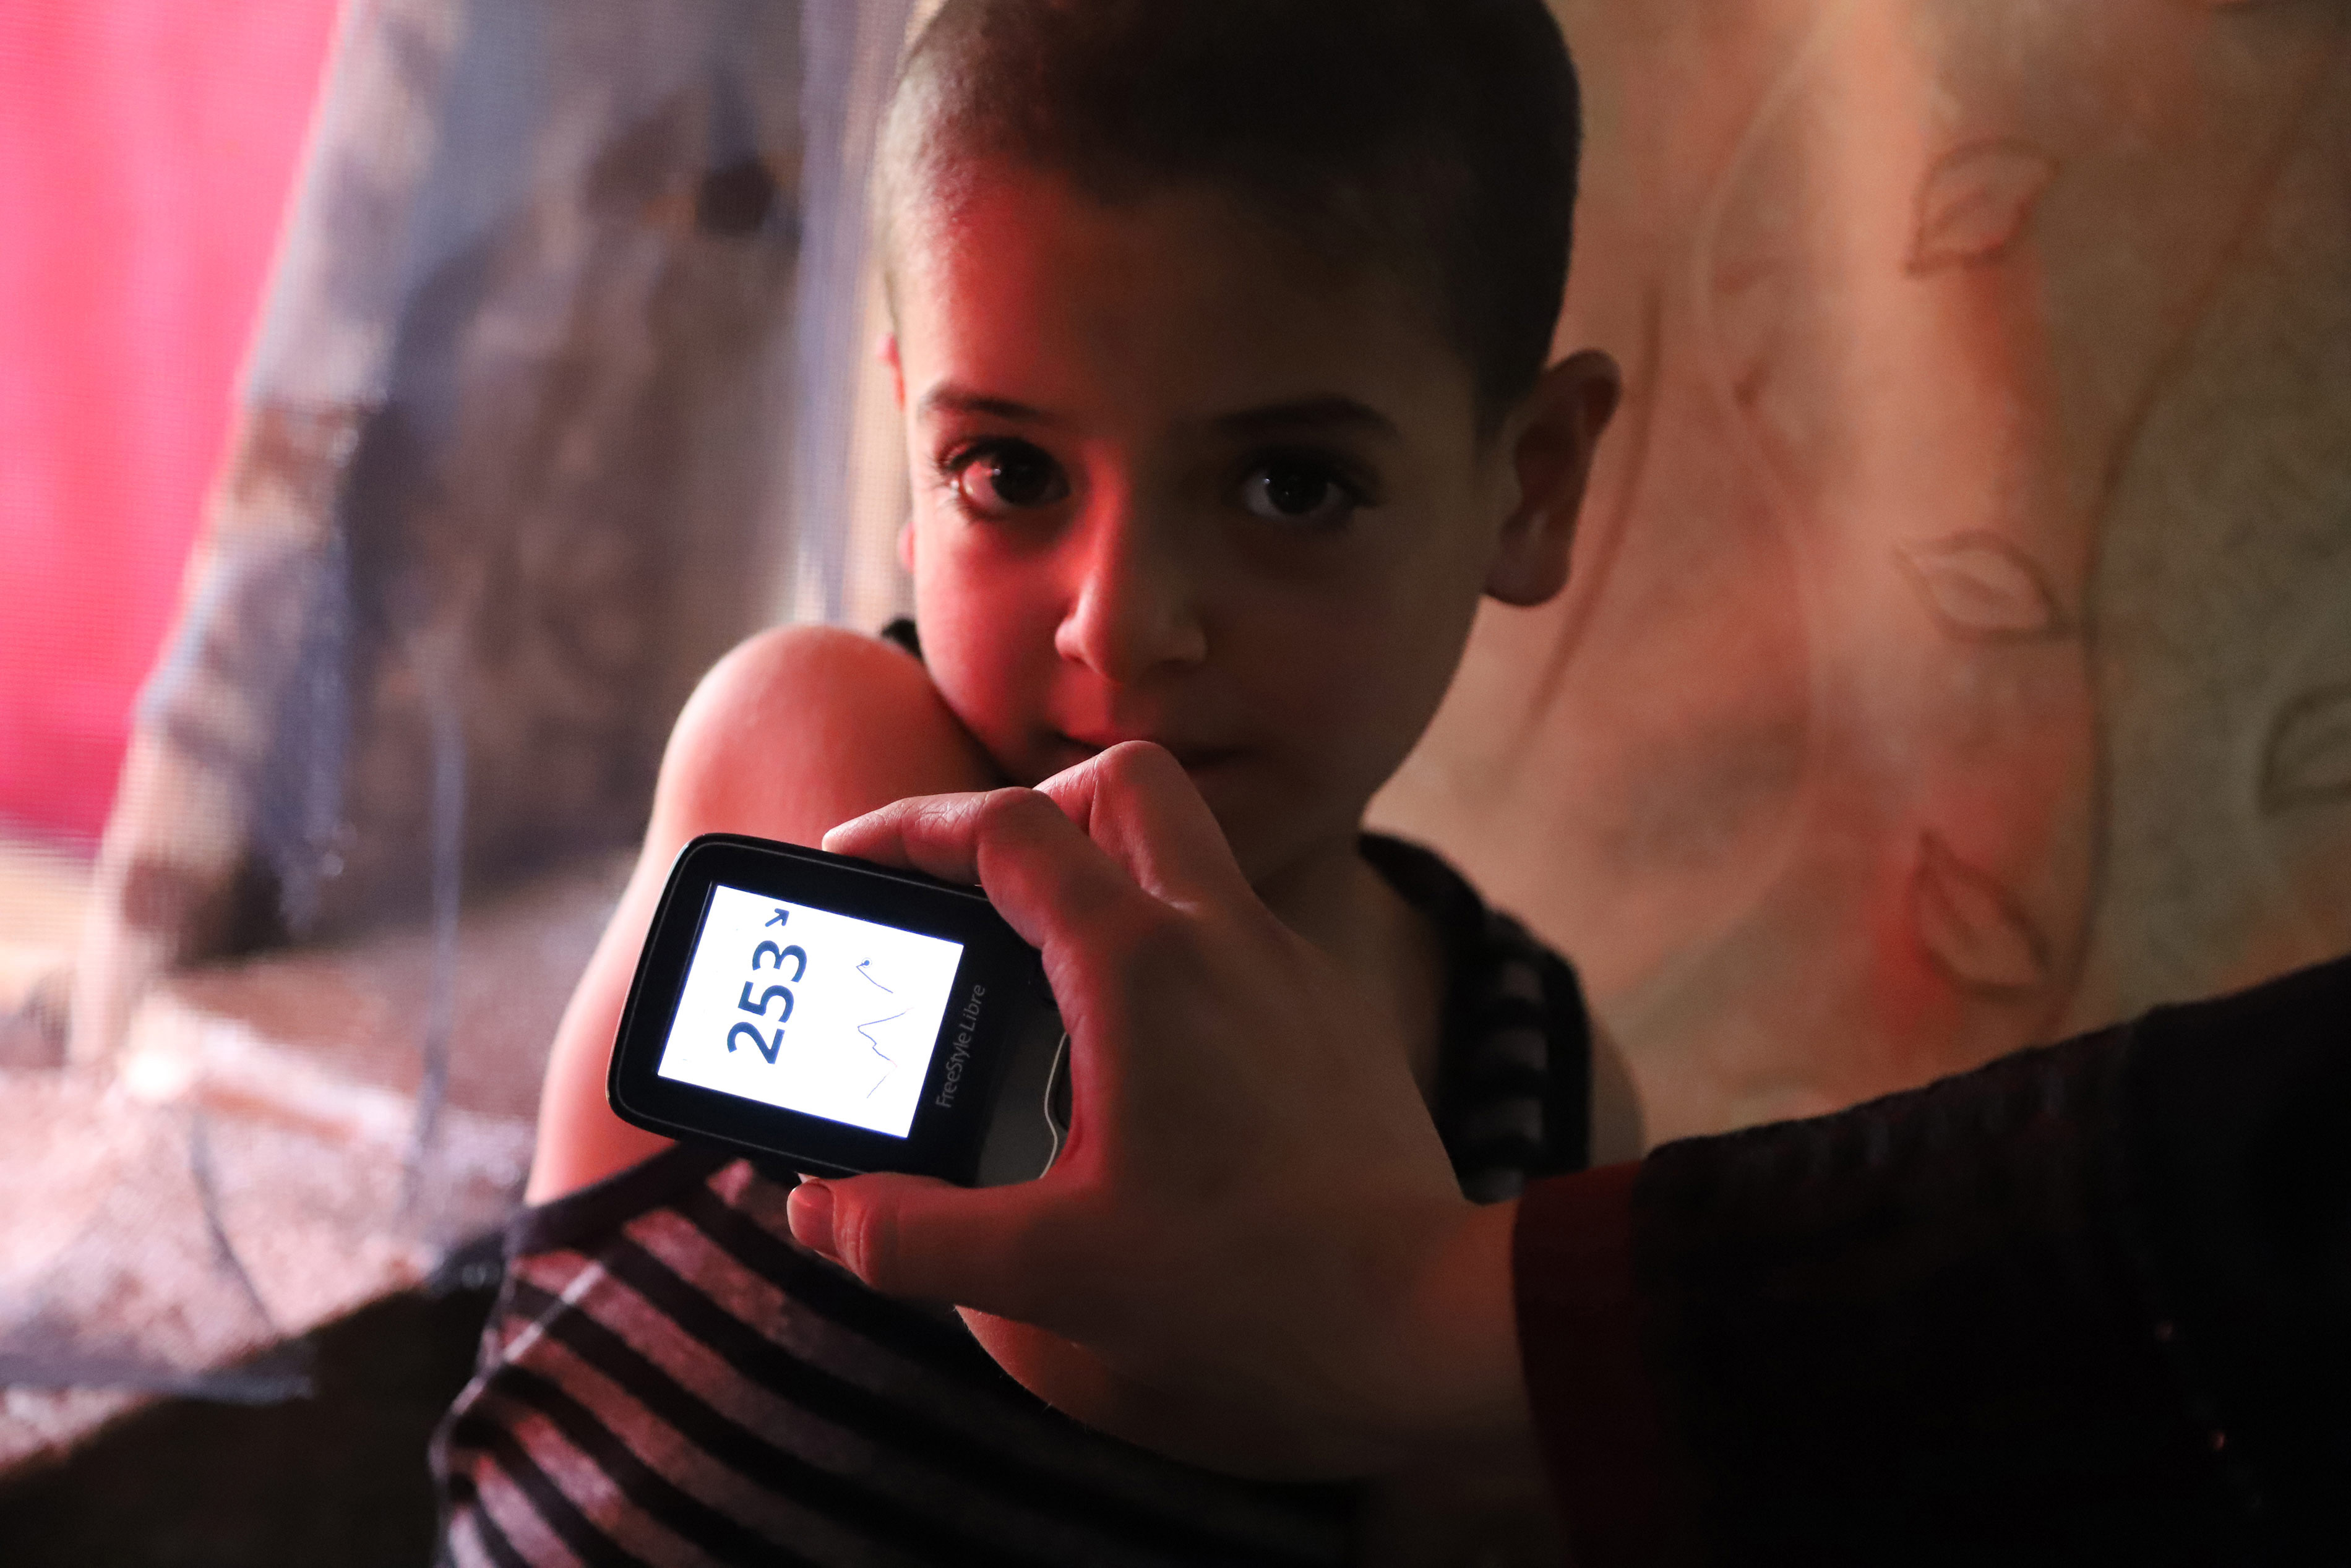 Moussa, 6 years old, was diagnosed with diabetes type I, two years ago.